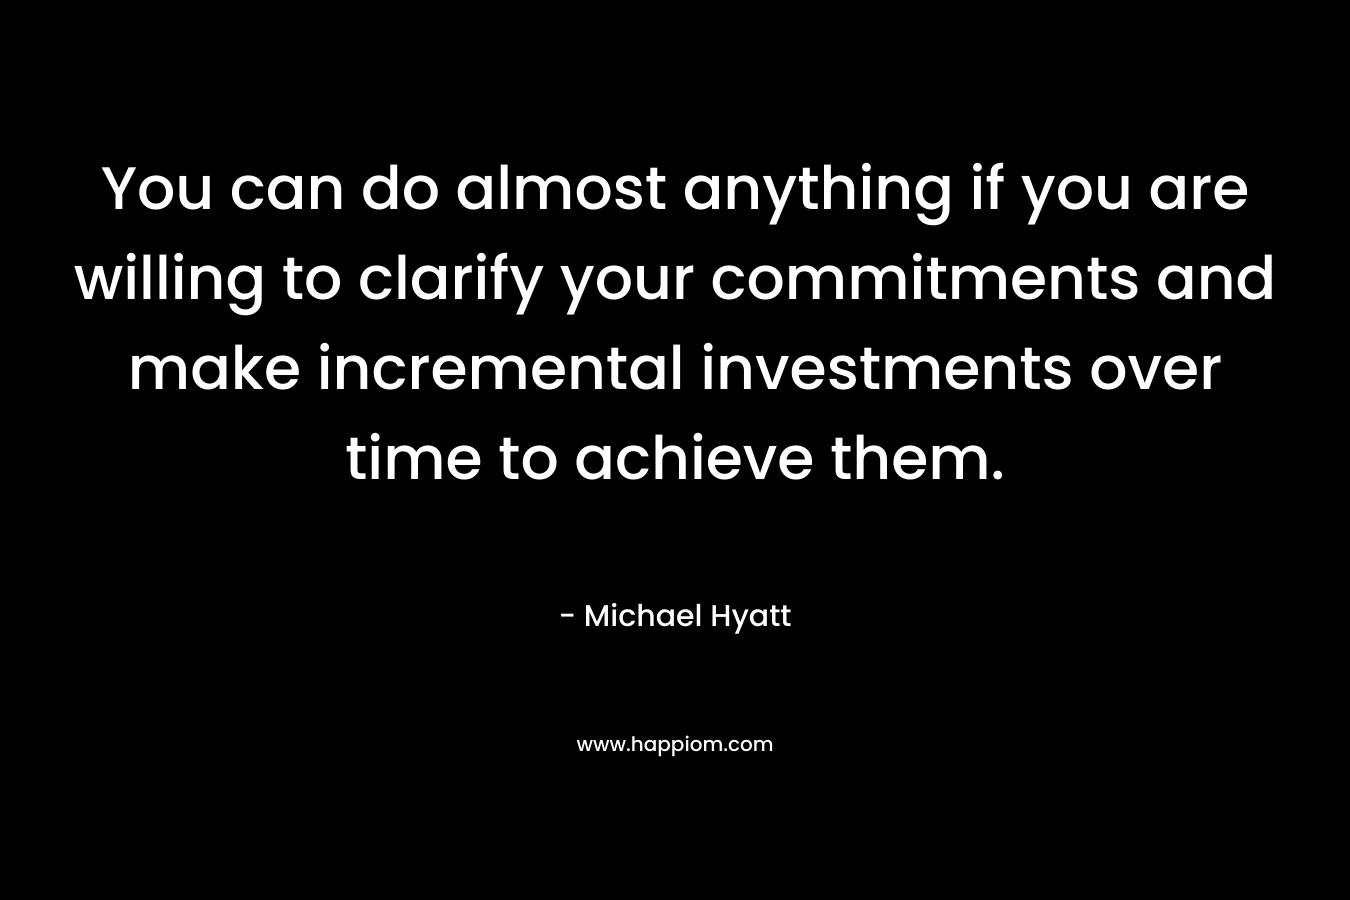 You can do almost anything if you are willing to clarify your commitments and make incremental investments over time to achieve them. – Michael Hyatt